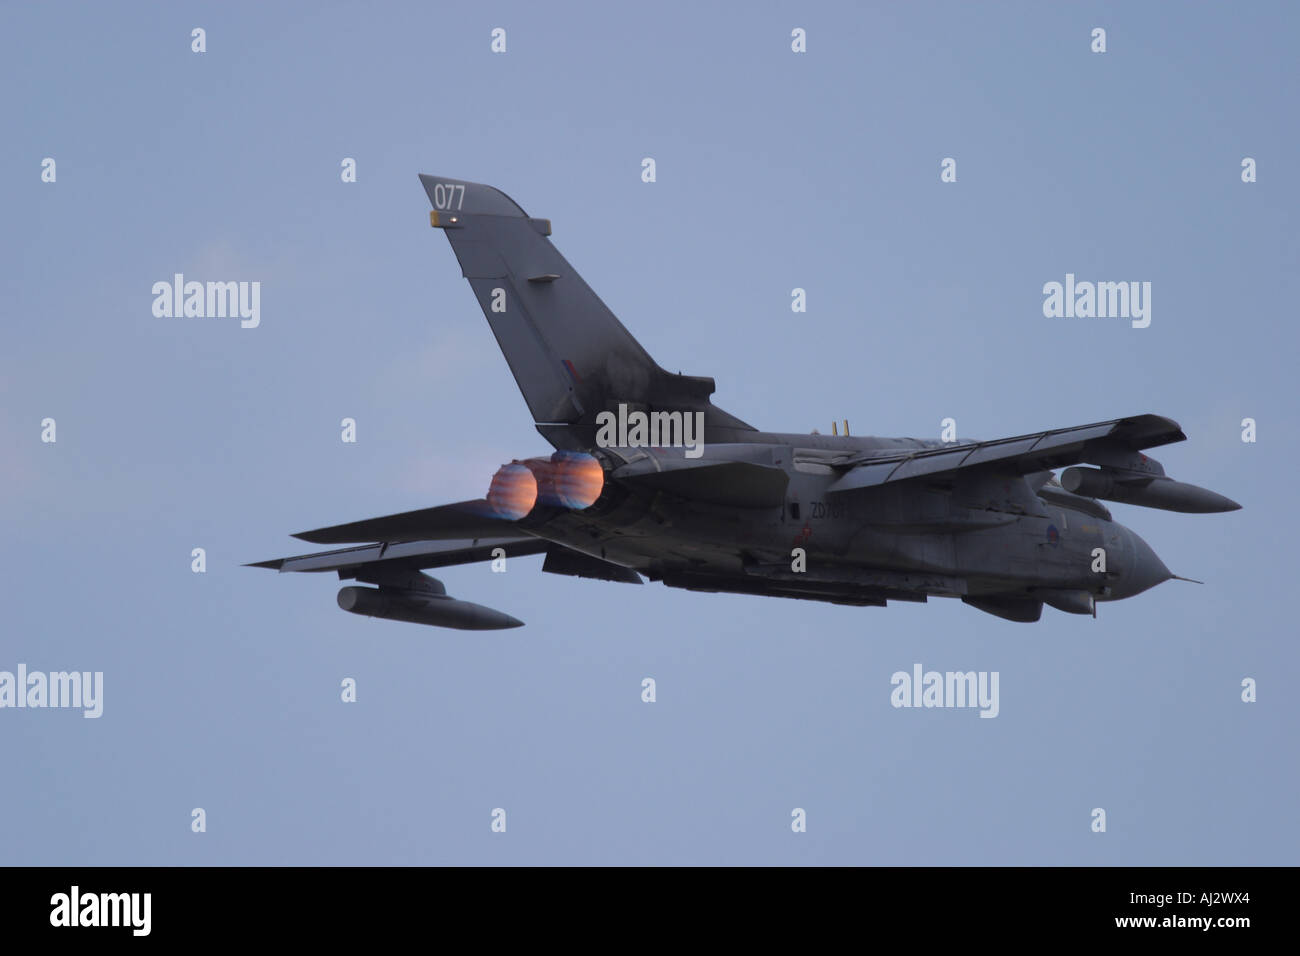 RAF Tornado GR4 low level fighter bomber with engines using afterburner Stock Photo